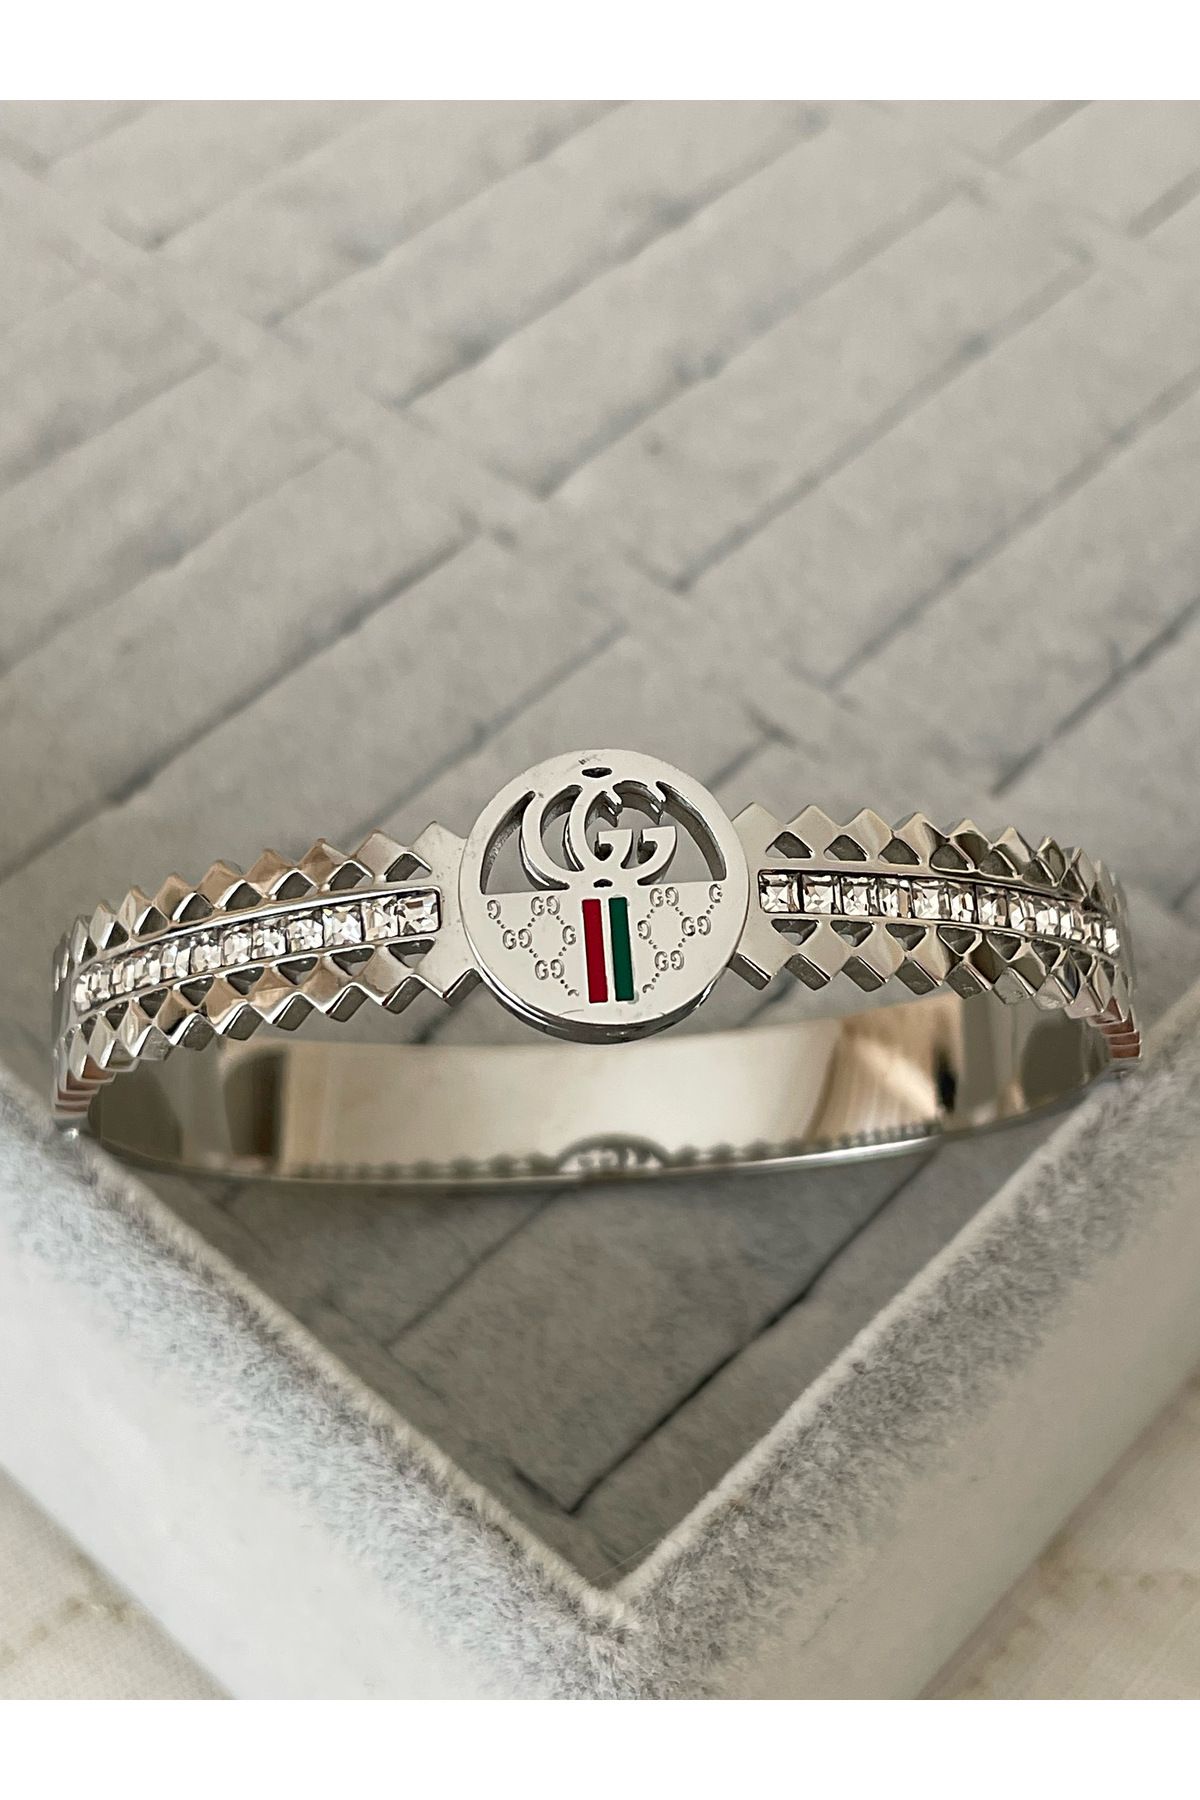 Gucci Bracelets Jewelry & Watches for Women | Neiman Marcus